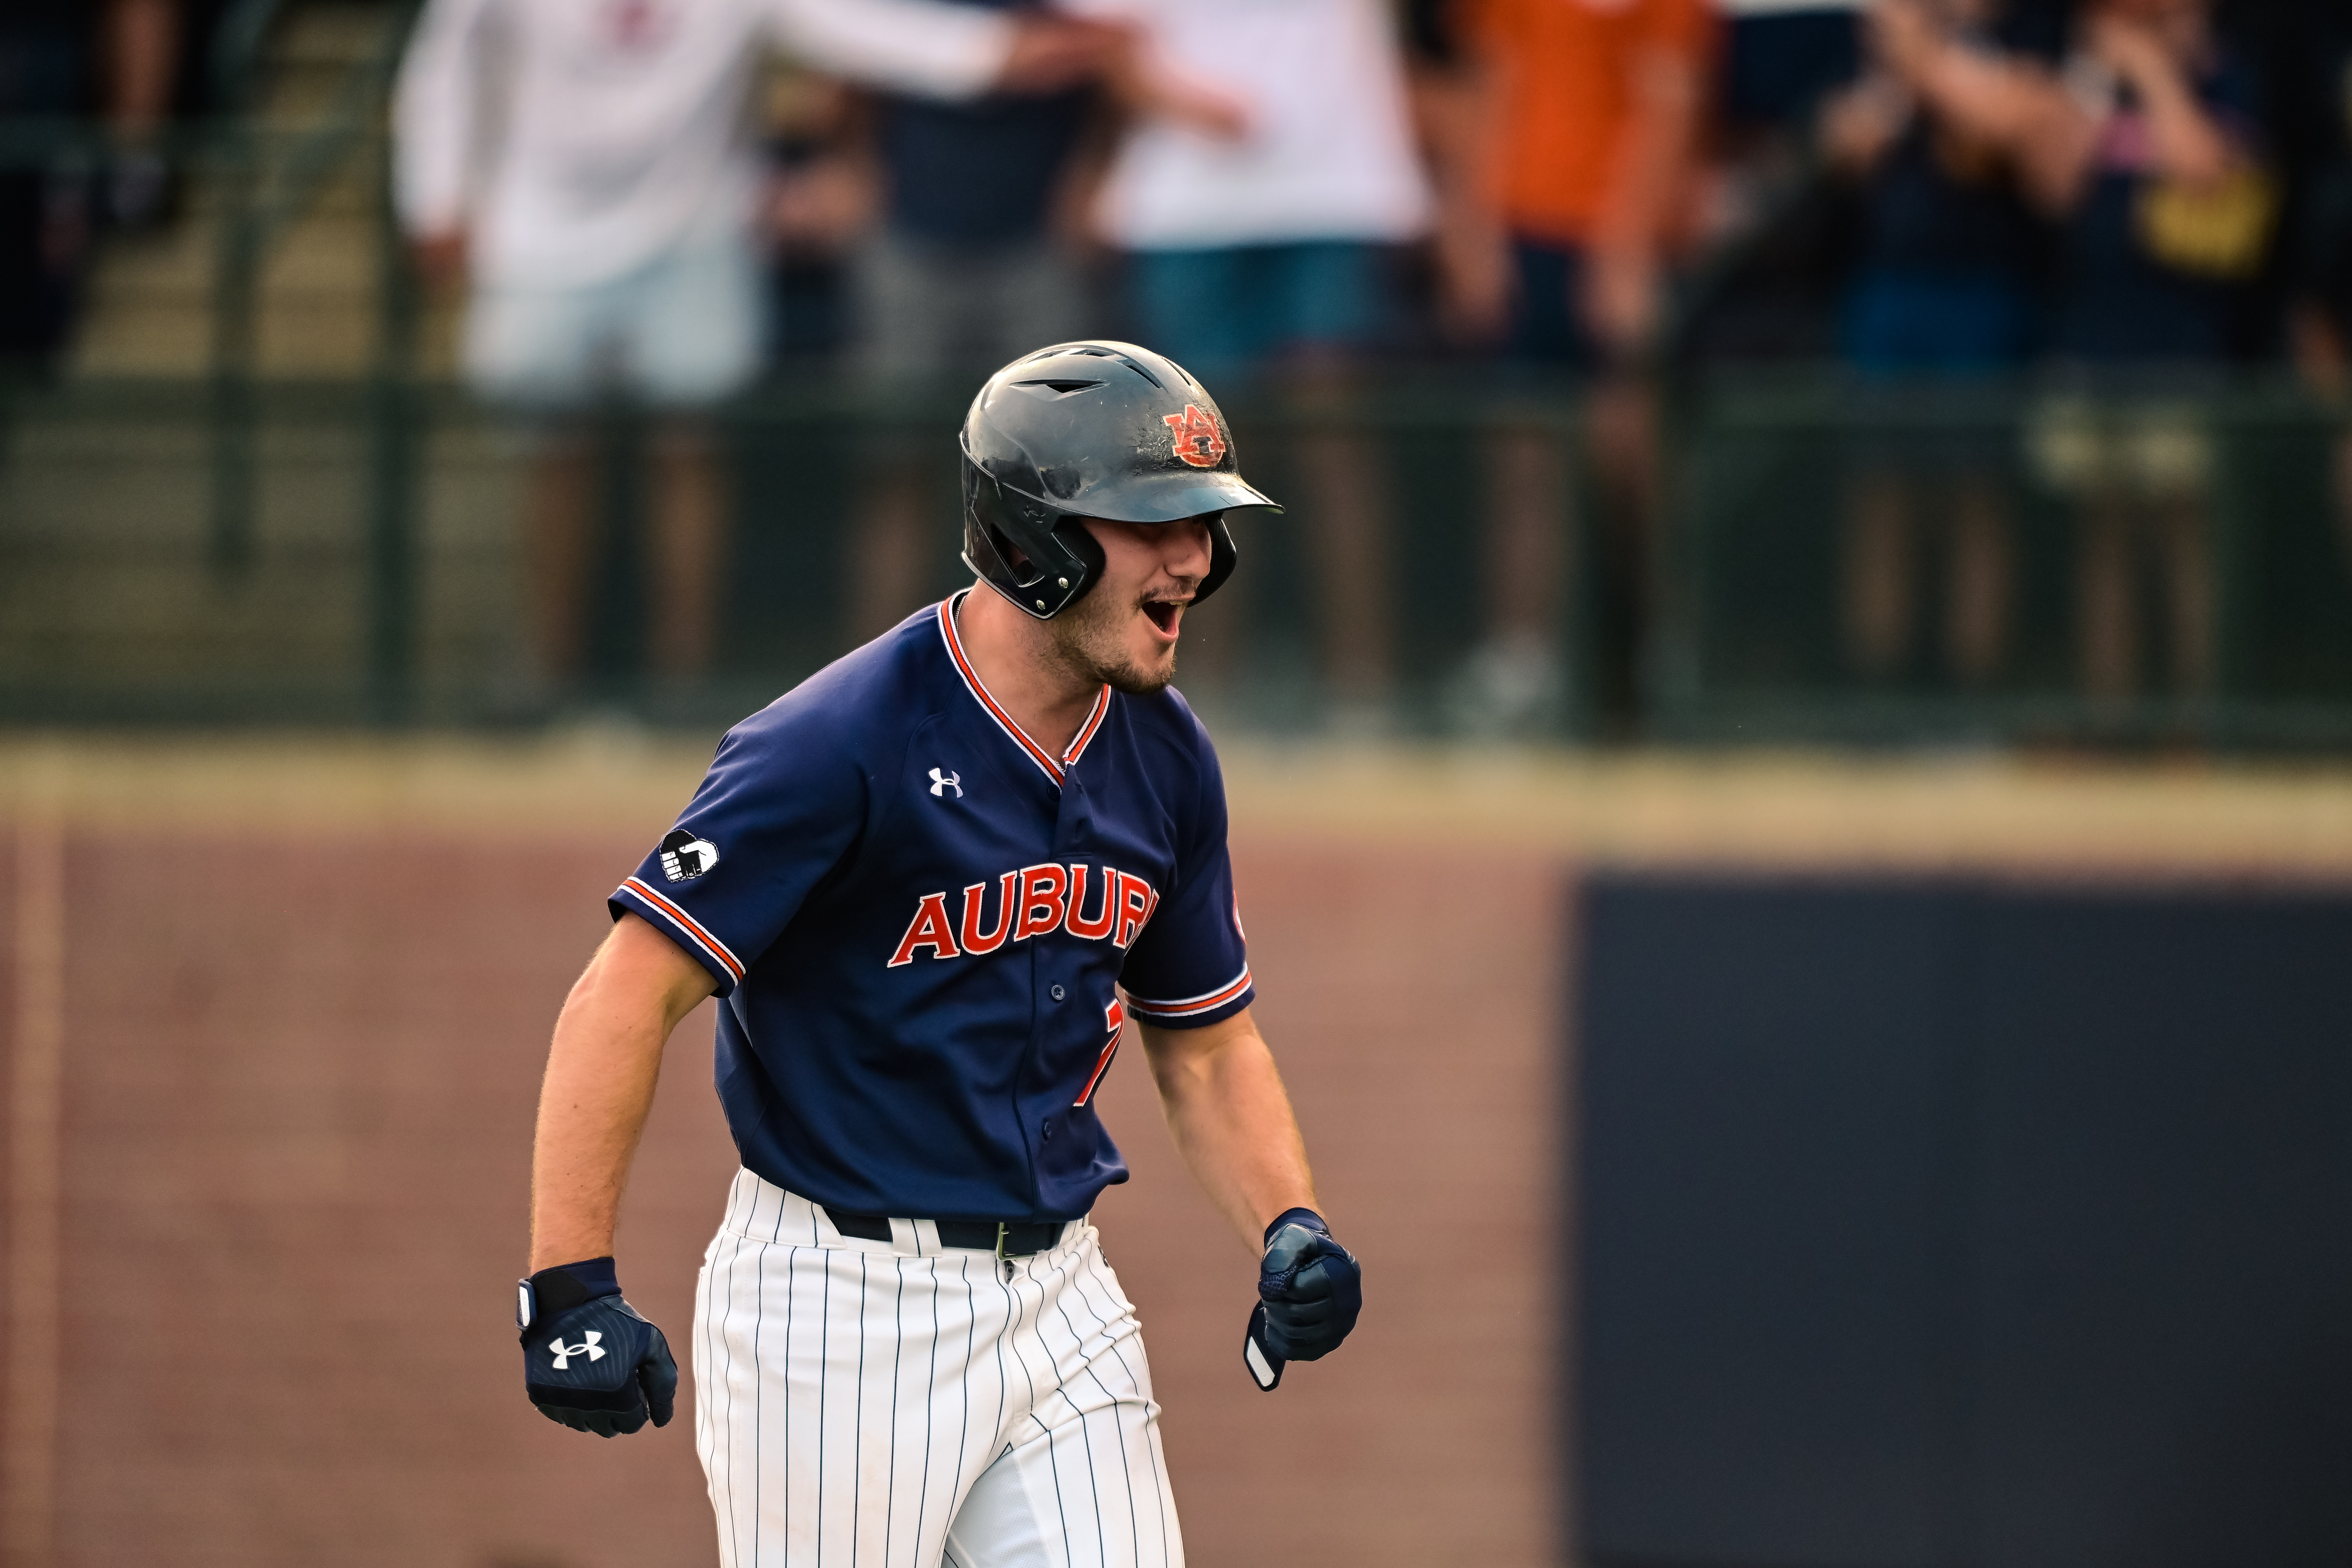 Auburn-Florida State baseball live stream (6/4) How to watch NCAA tournament online, TV, time